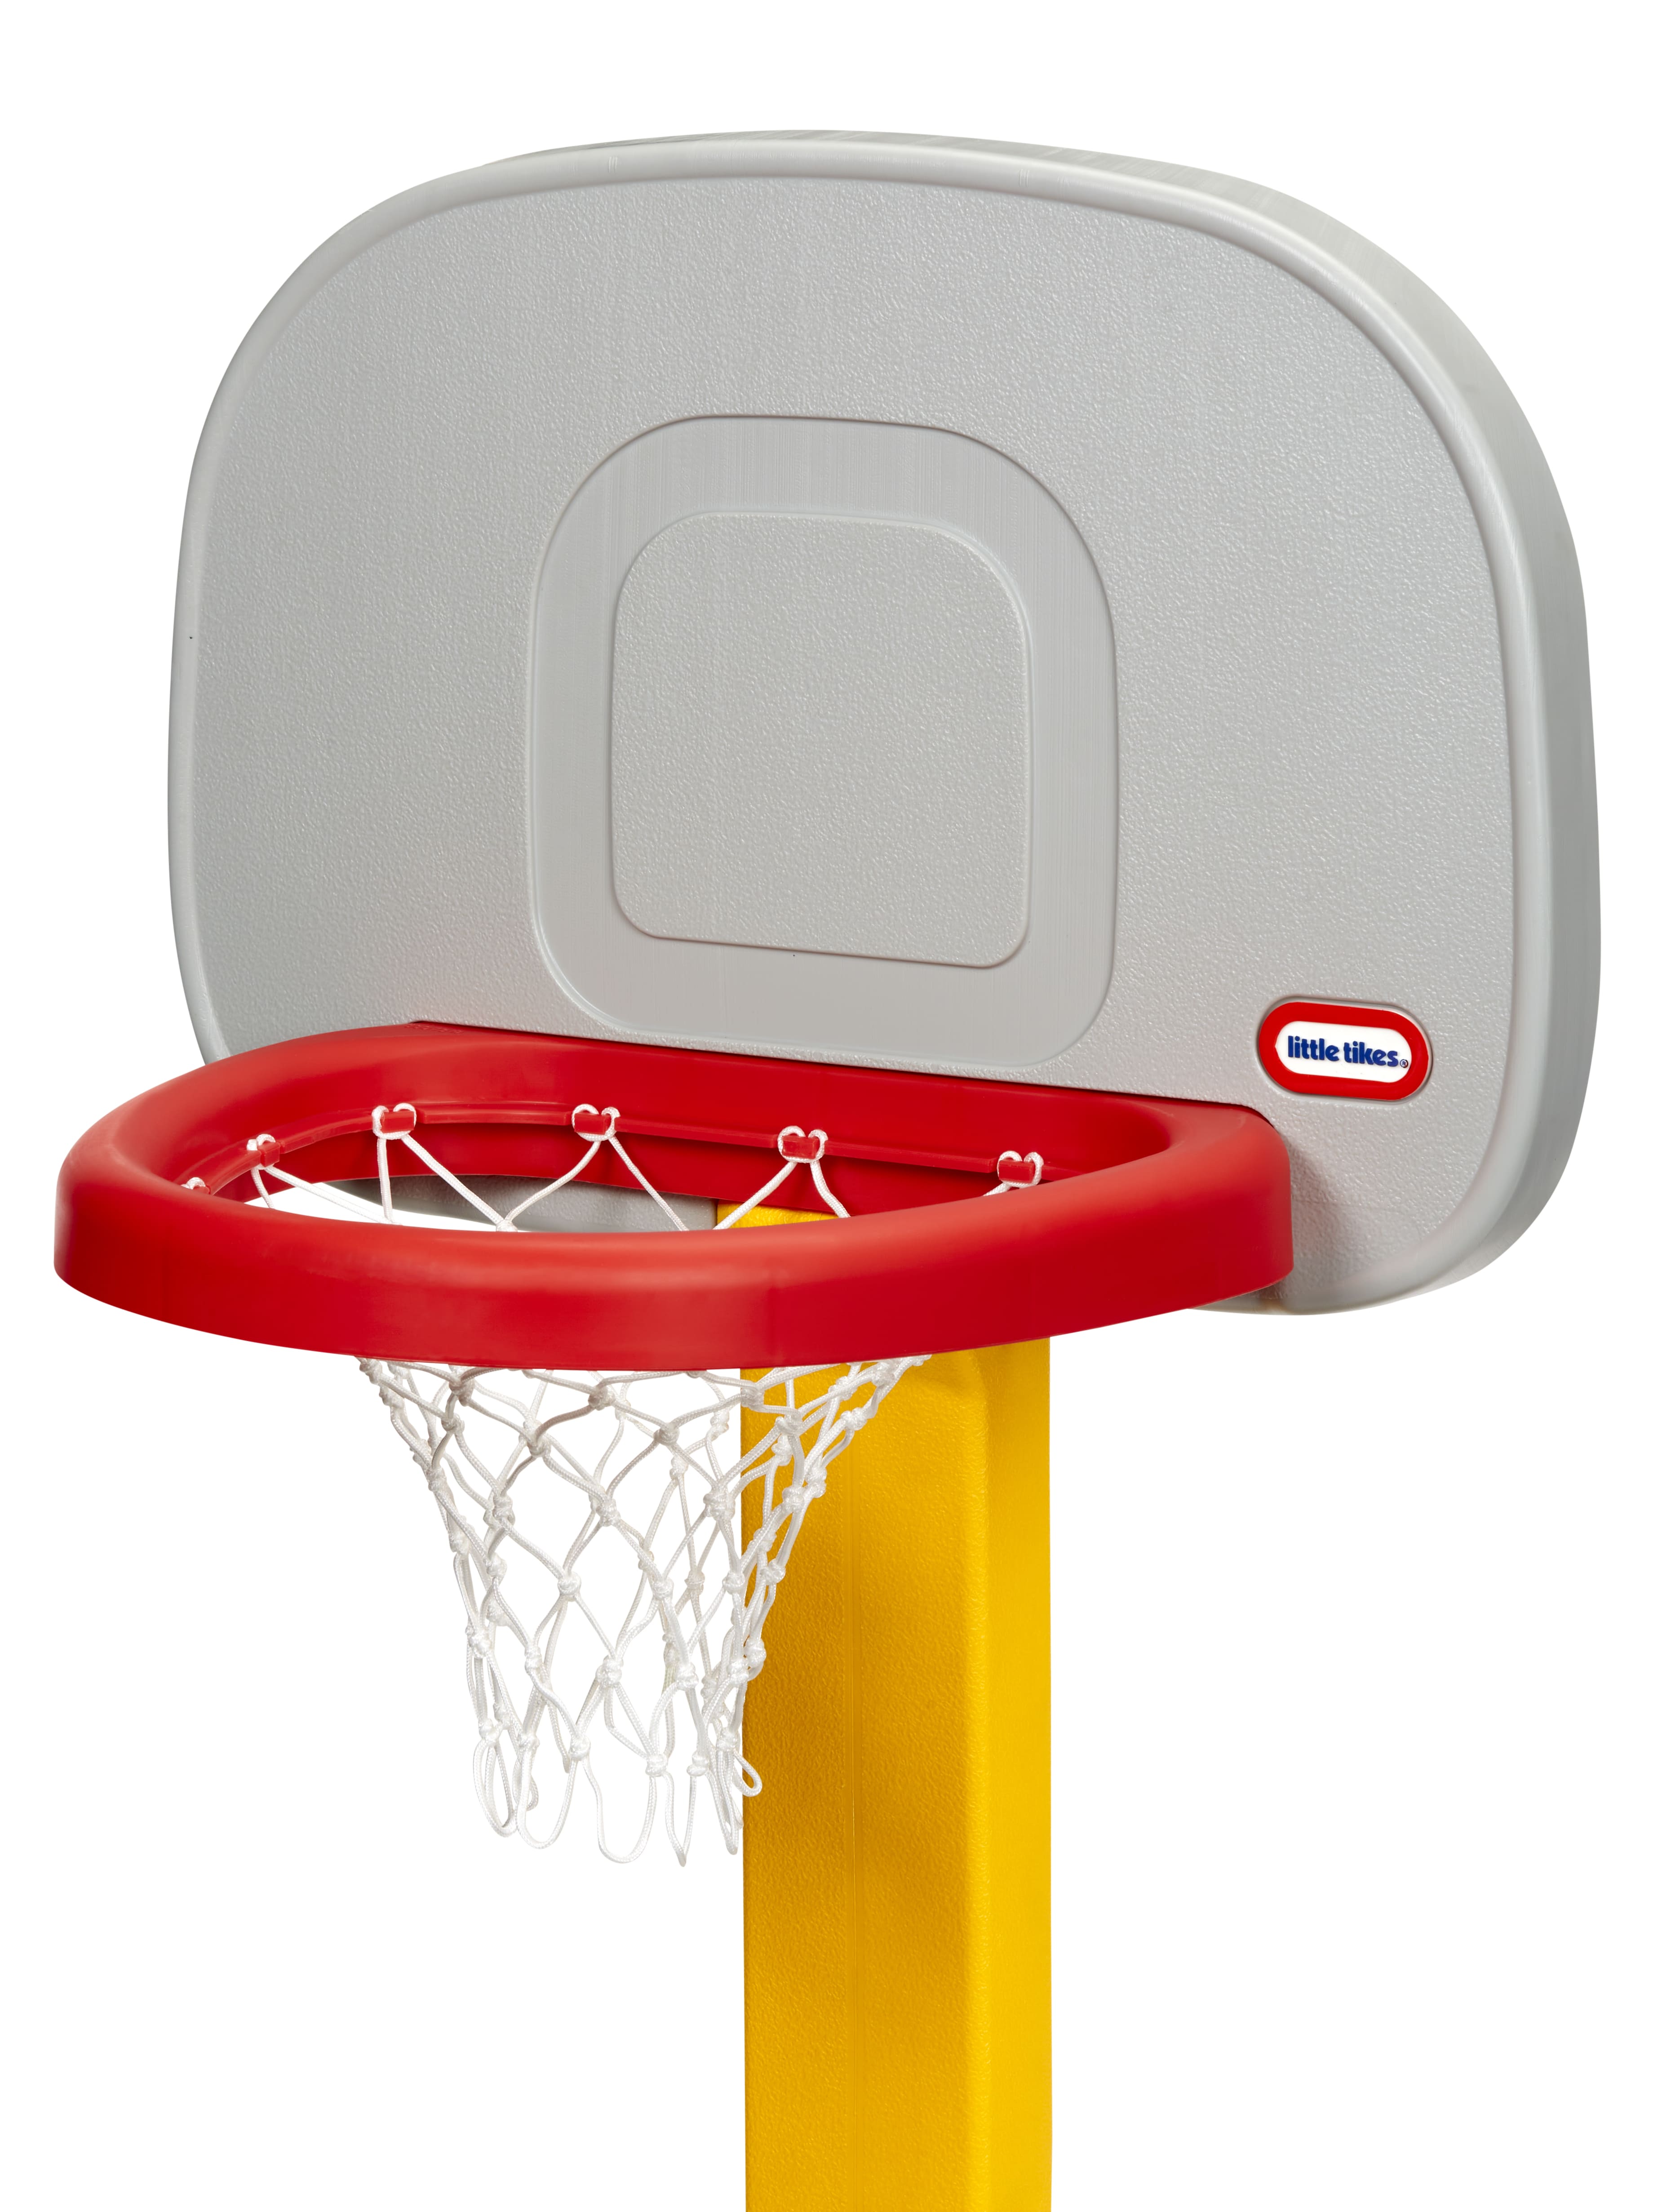 Little Tikes TotSports Basketball Set with Non-Adjustable Post - image 3 of 5